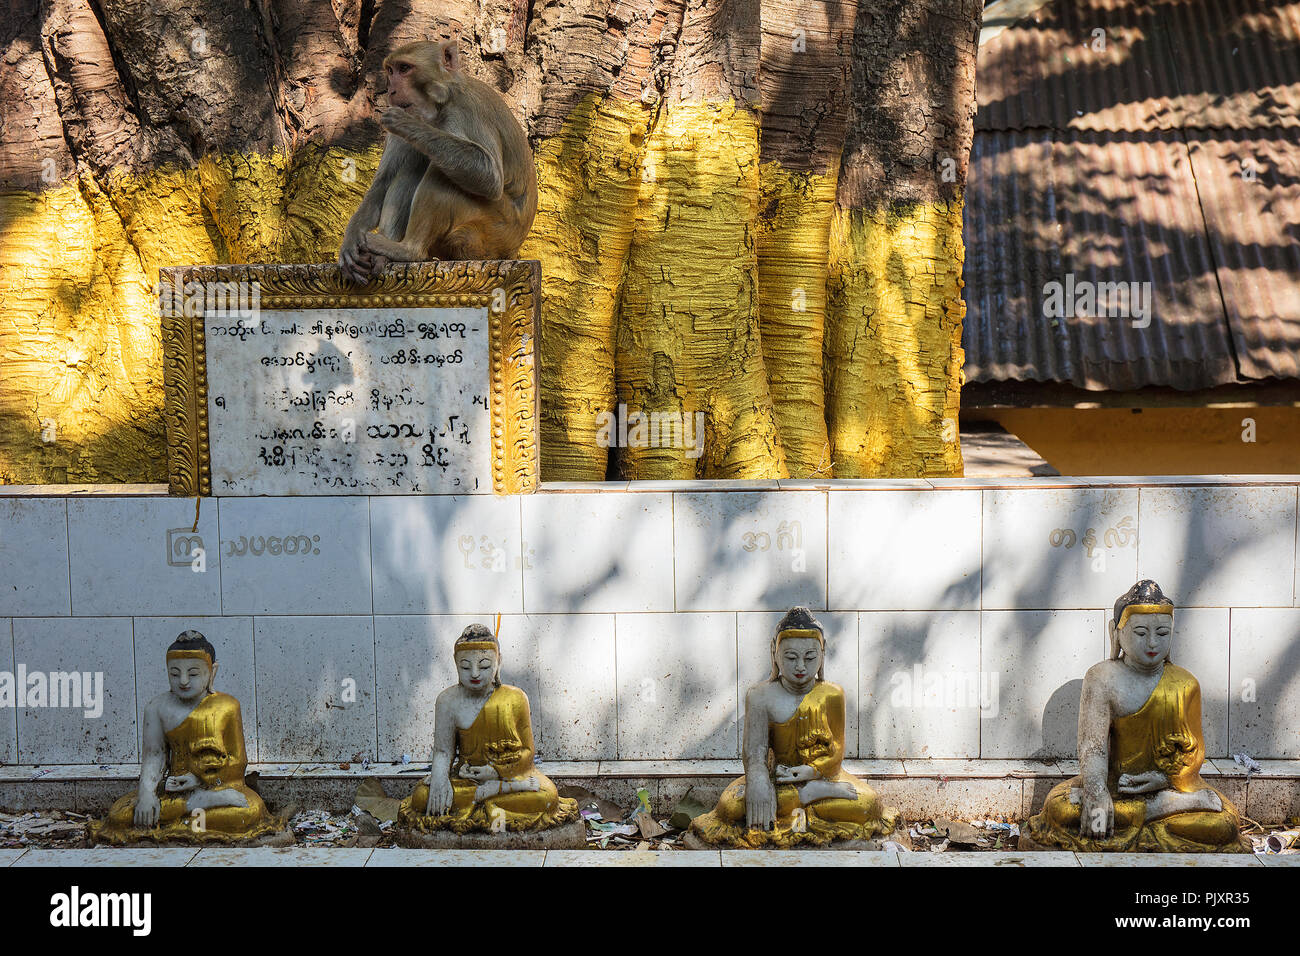 A macaque monkey and some Buddha figures inside the Buddhist site at the top of the pedestal hill of Taung Kalat (Mount Popa), Myanmar (Burma). Stock Photo